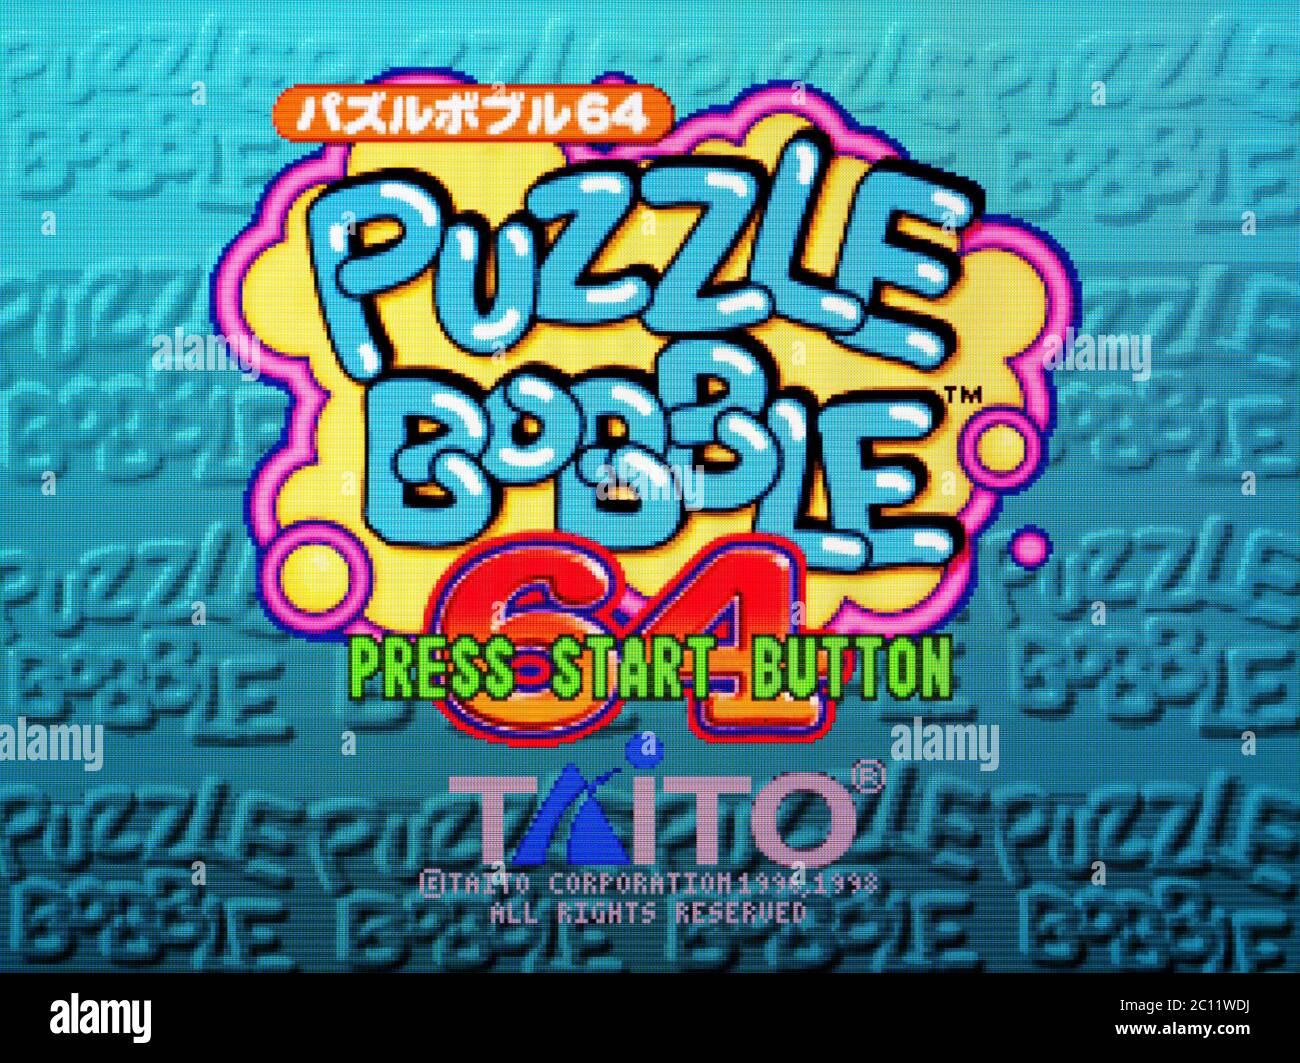 Puzzle Bobble 64 - Nintendo 64 Videogame - Editorial use only Stock Photo -  Alamy